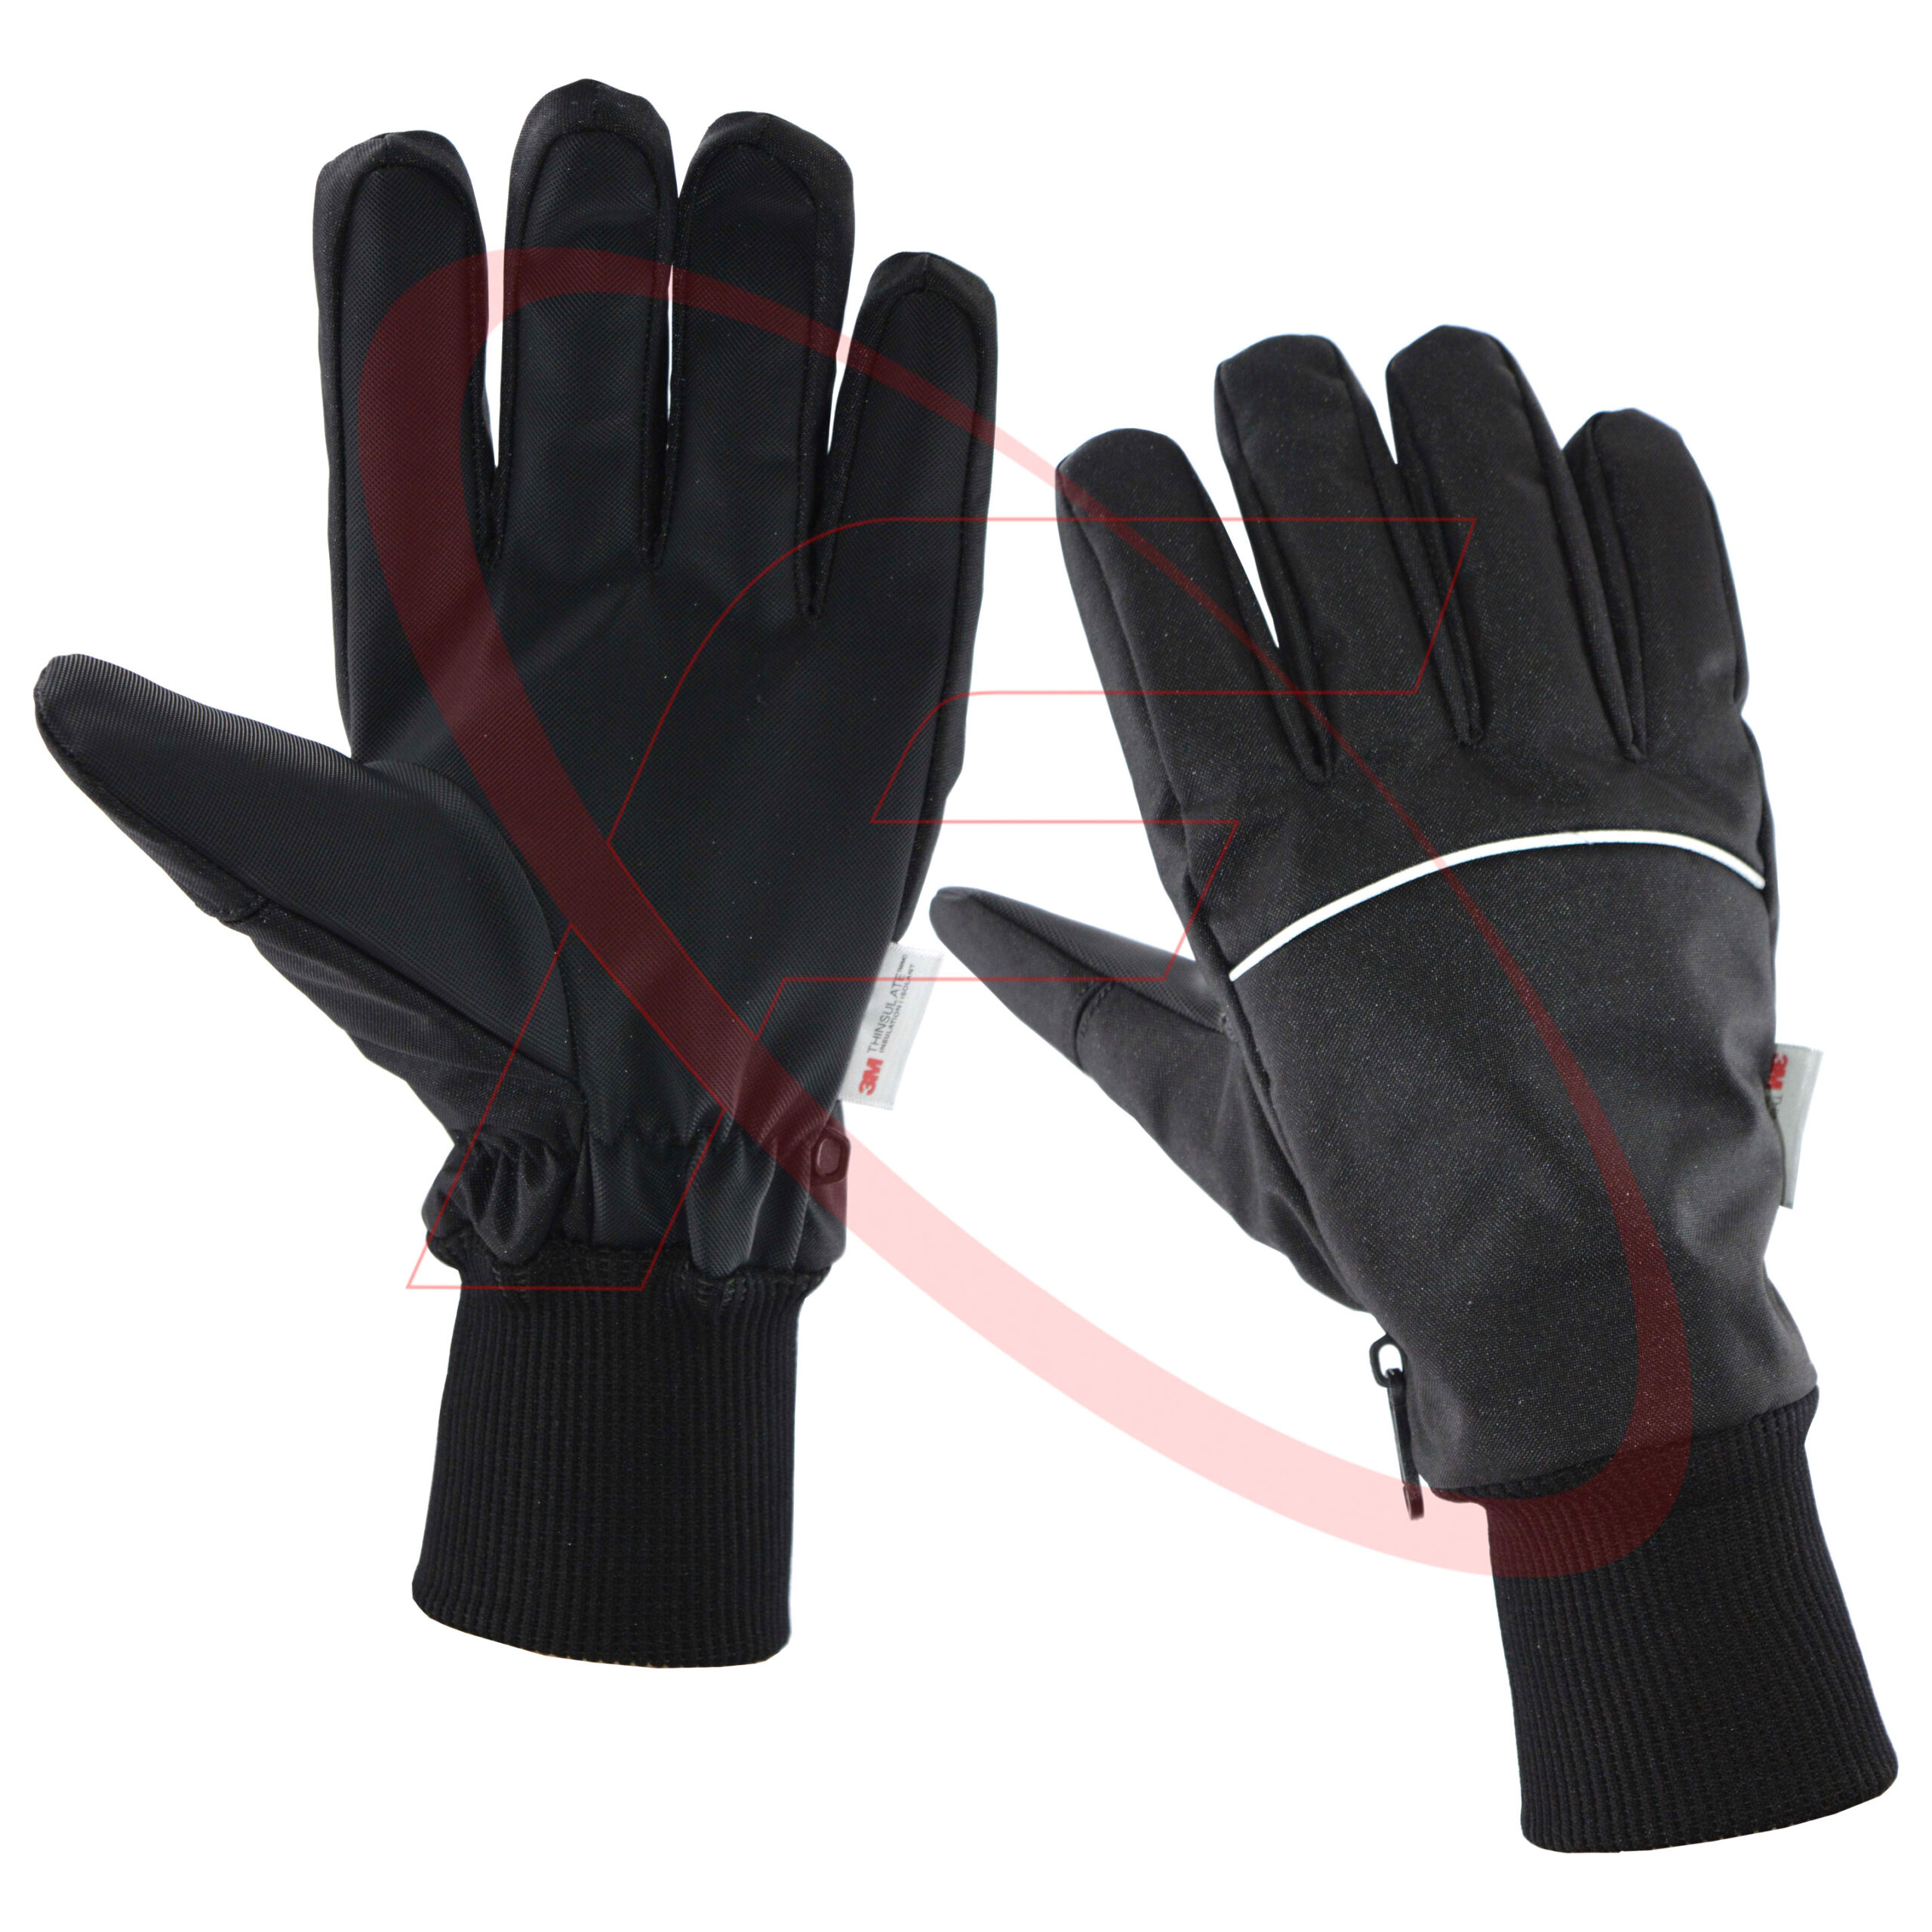 Winter Mechanic Gloves in Synthetic Leather / Best Winter Safety Gloves Winter Gloves for Wind and Water Resistant